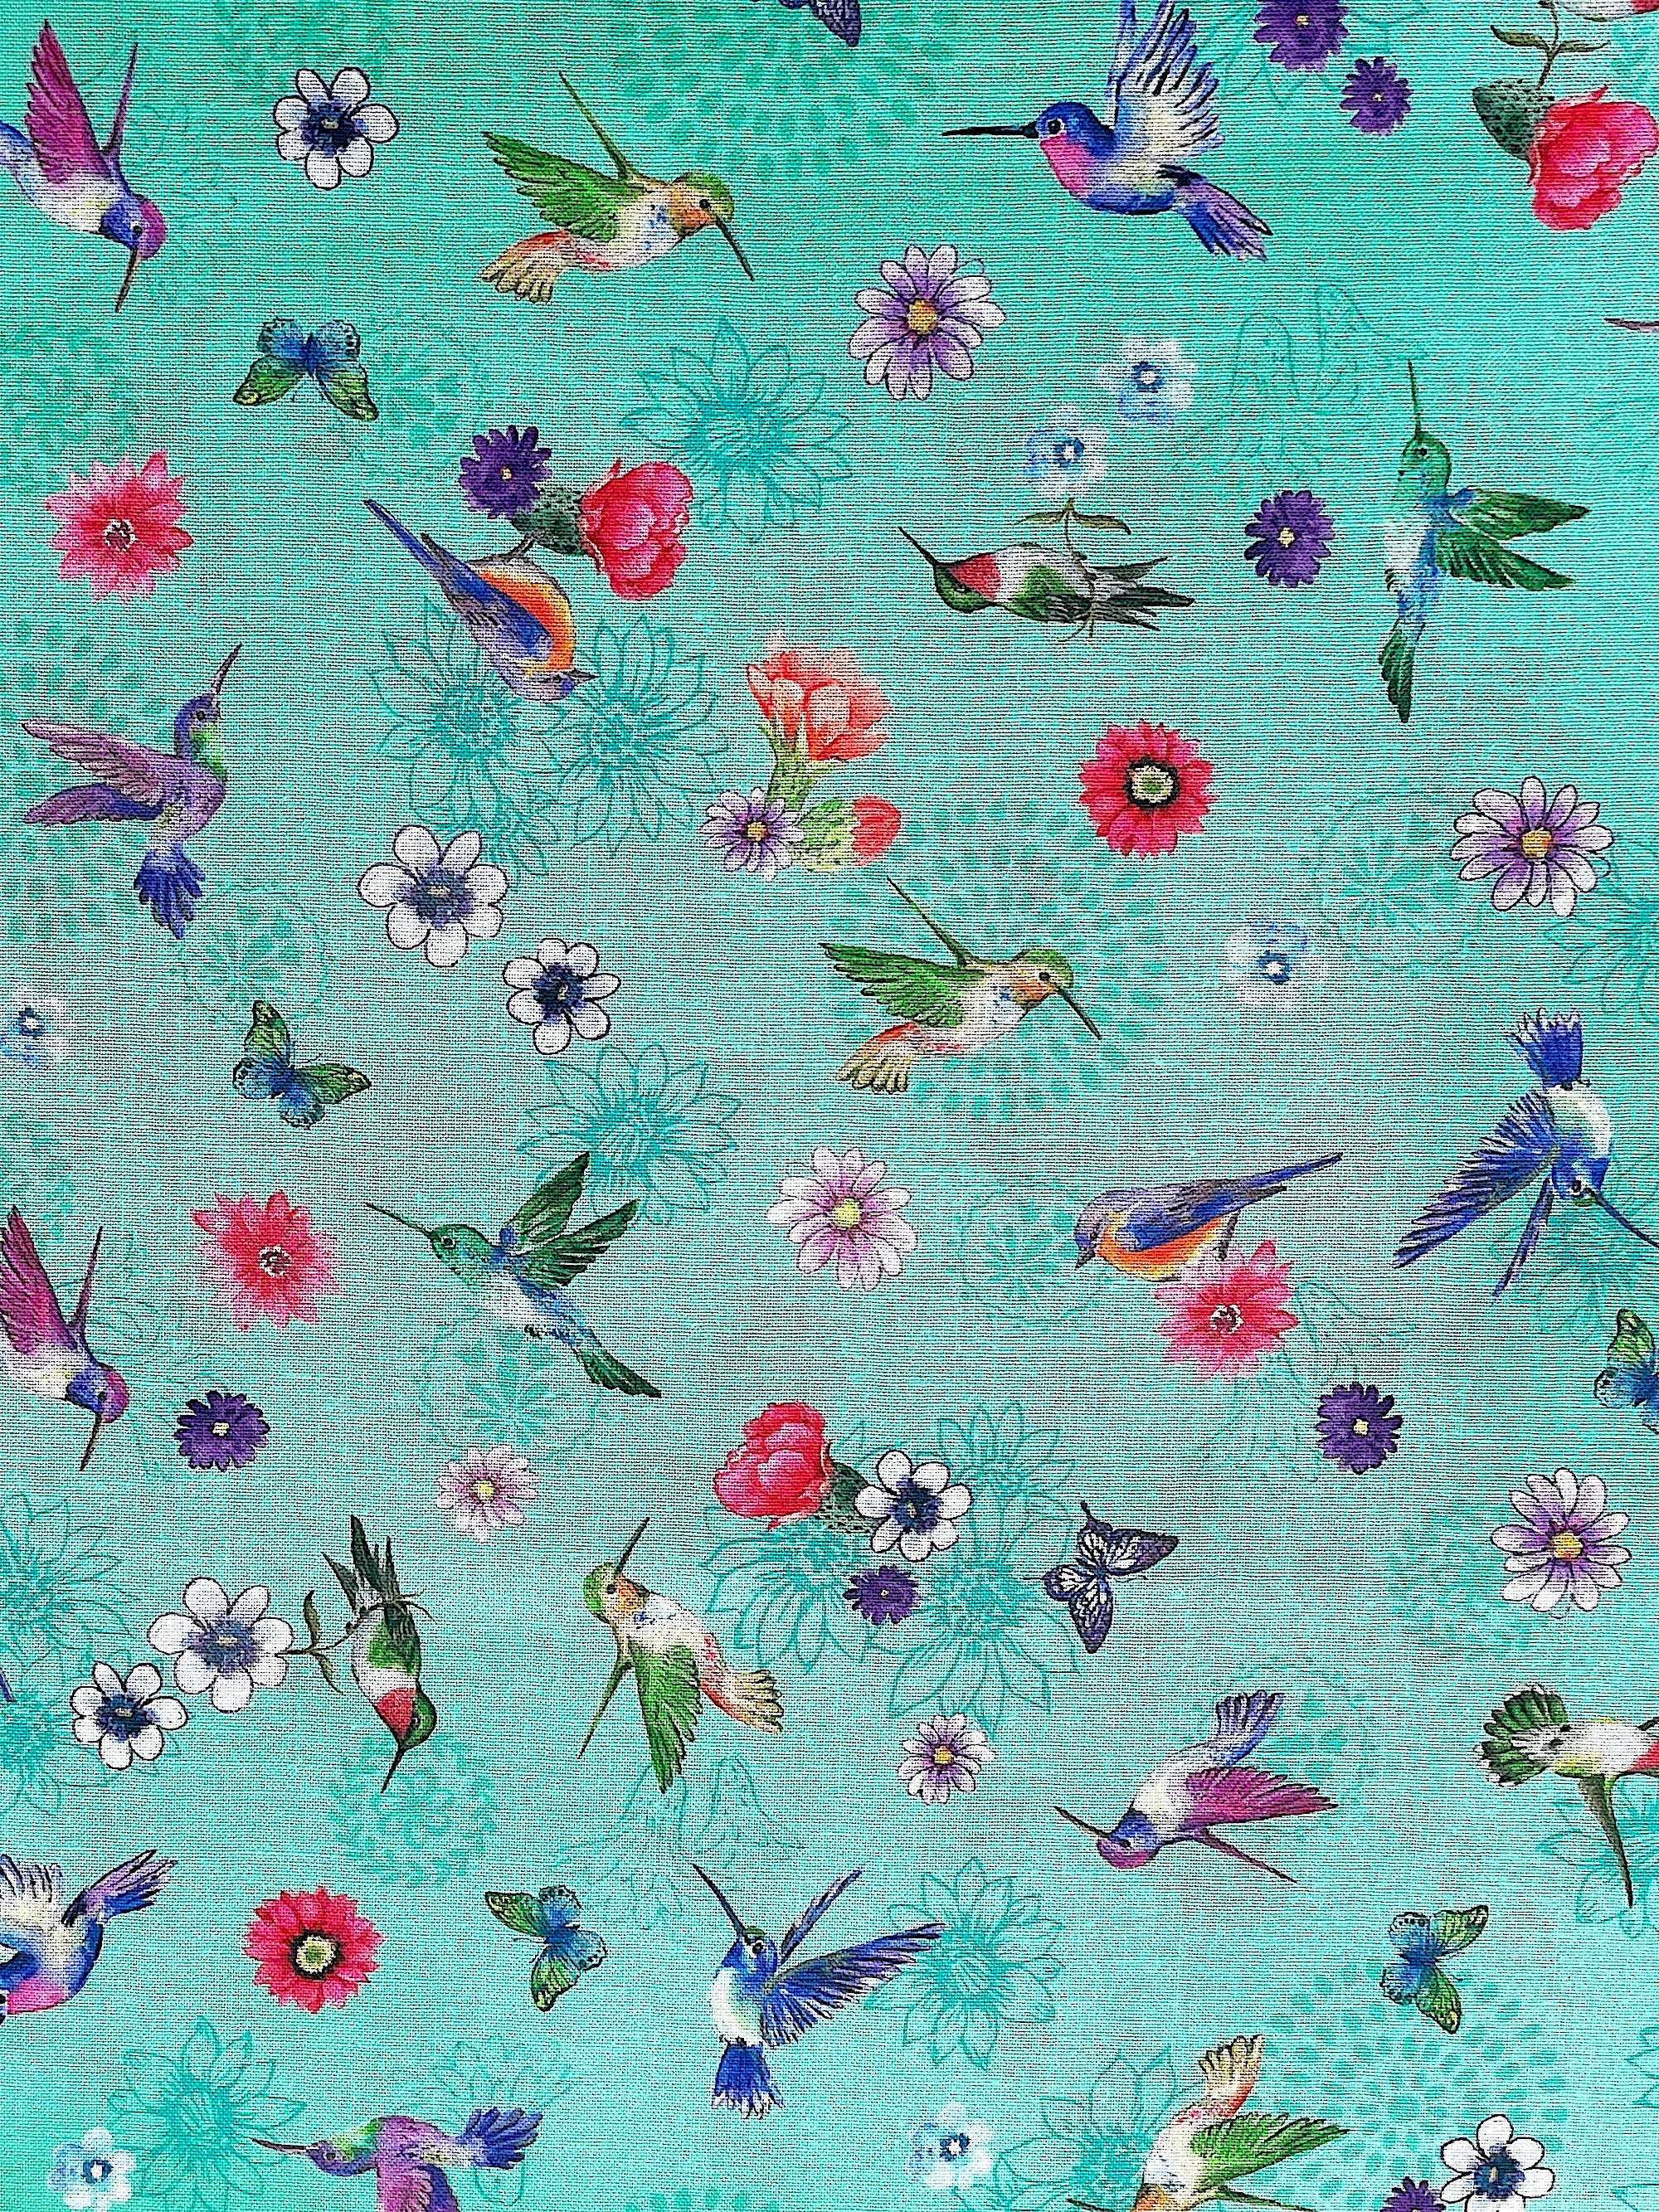 Aqua cotton fabric is covered with hummingbirds, flowers and hummingbirds.